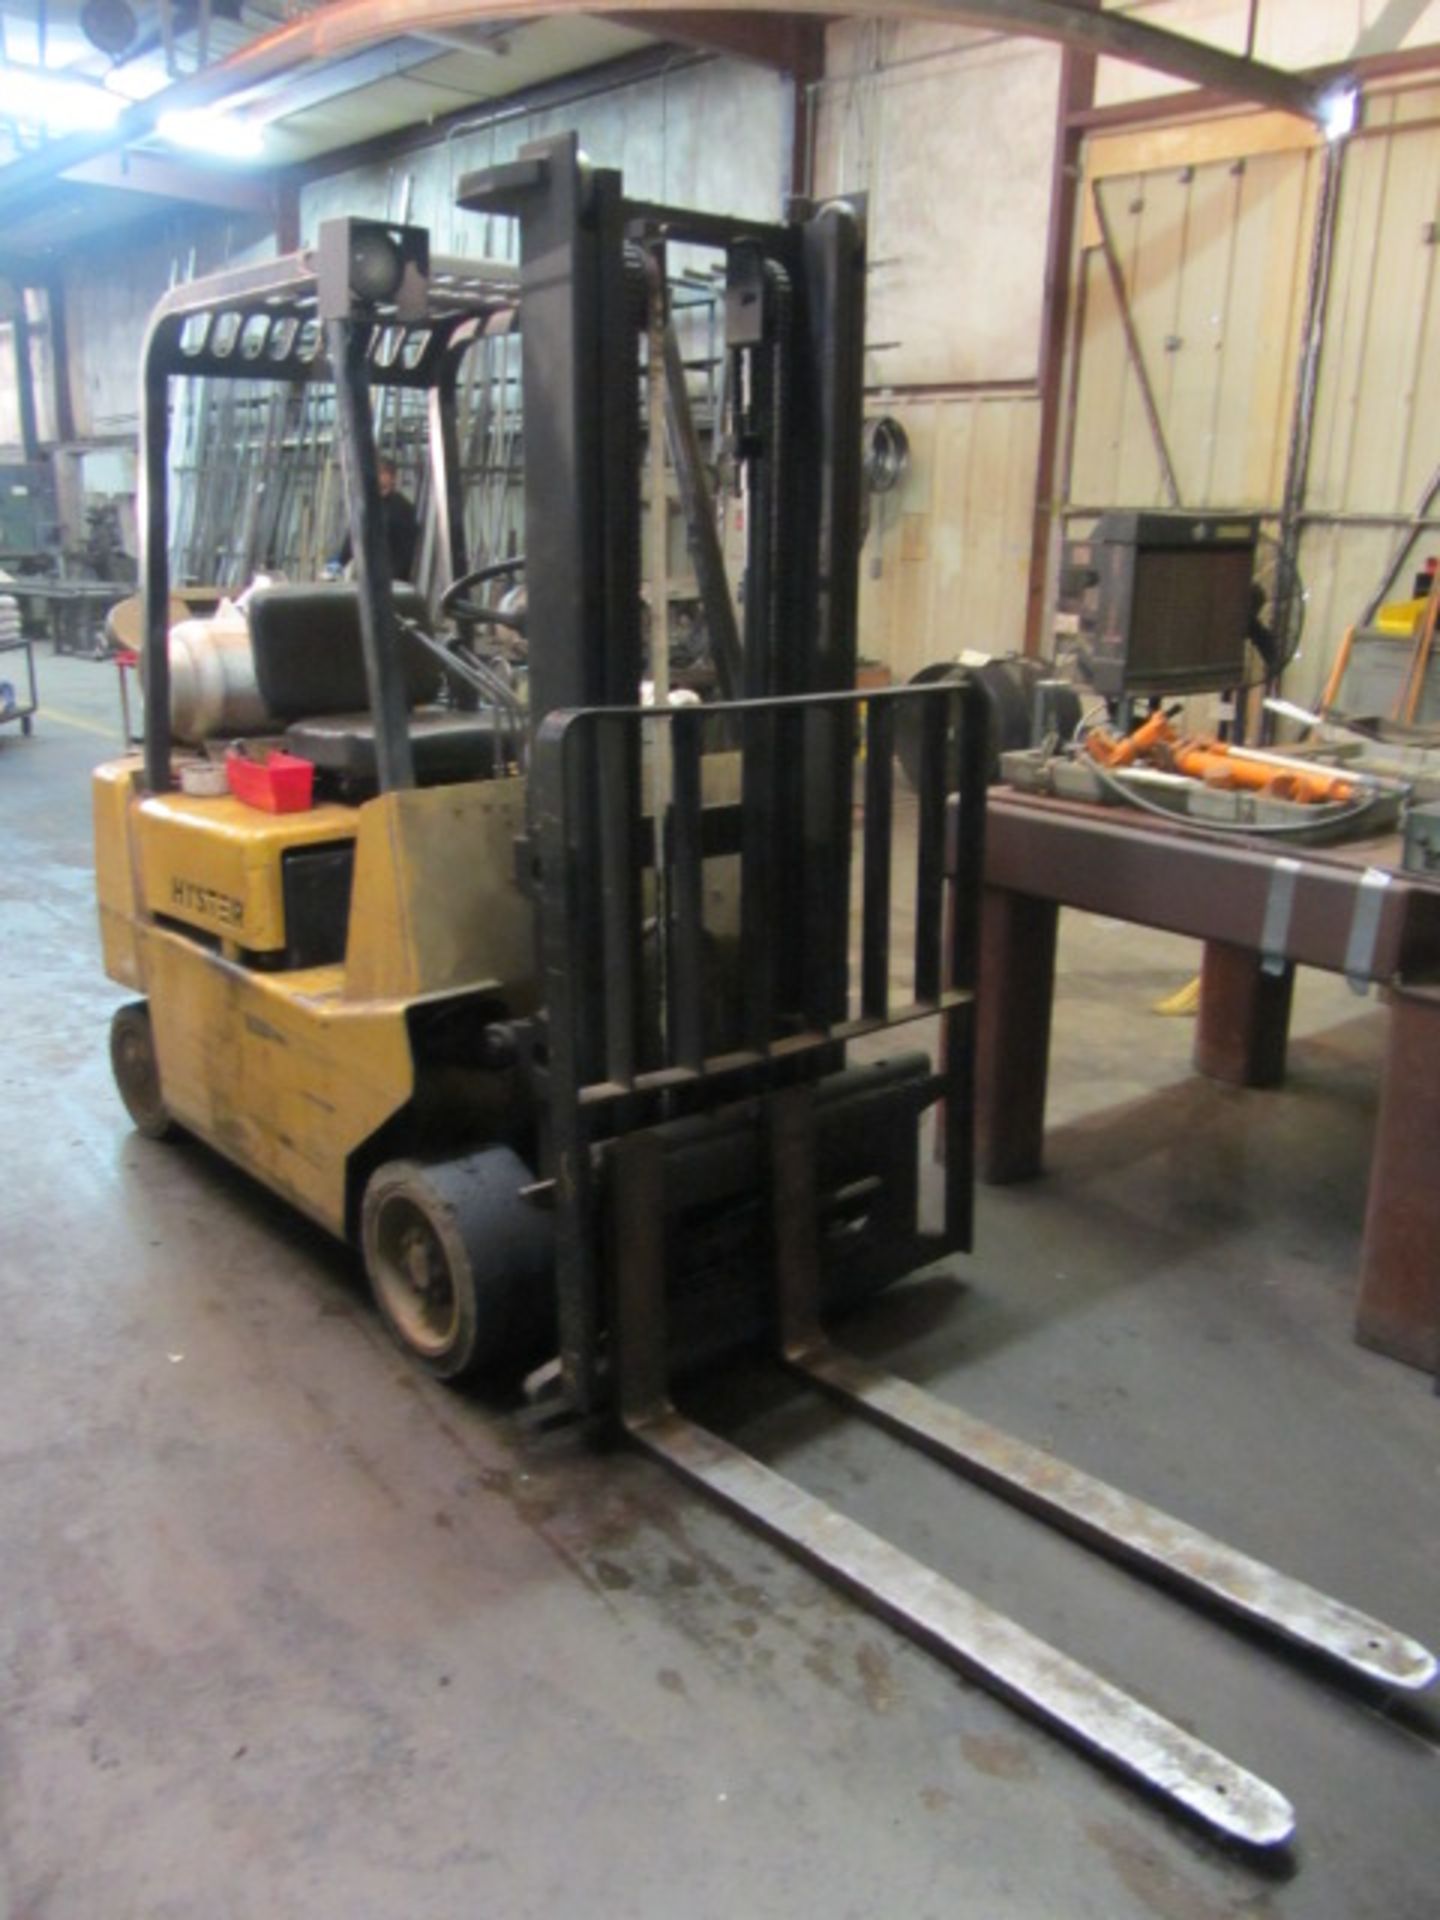 Hyster Model S40XL 4650lb Capacity Propane Forklift with 4 Hard Tires, 48'' Forks, 2-Stage Mast,